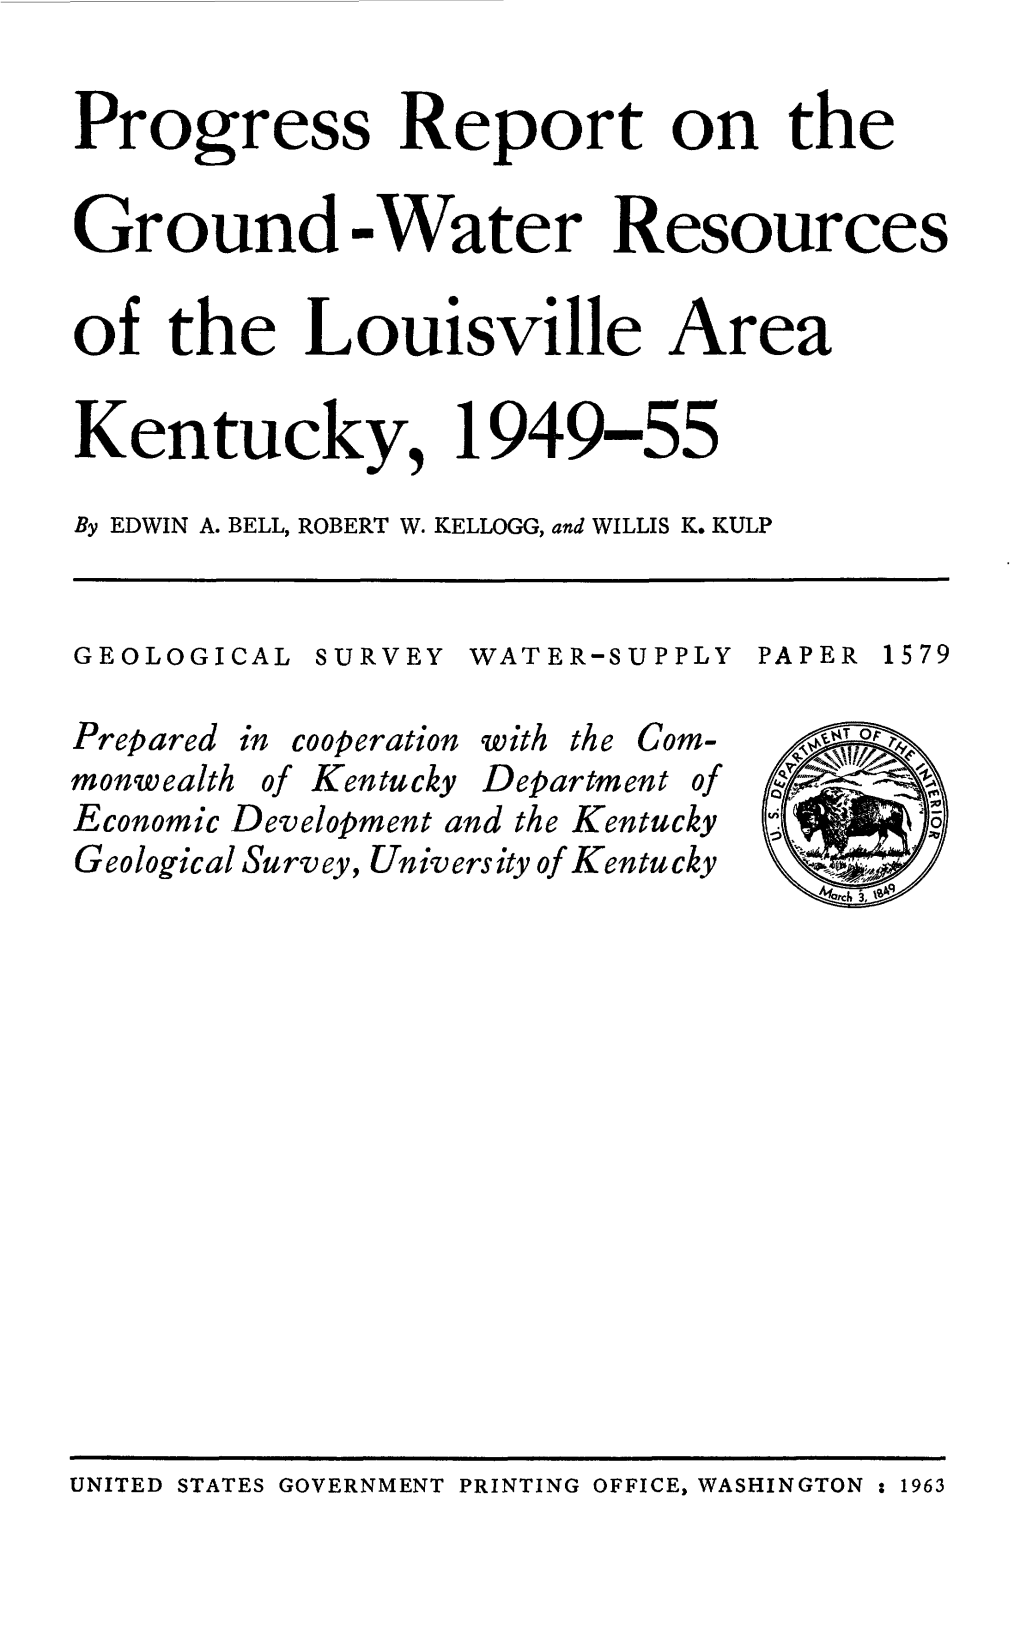 Progress Report on the Ground-Water Resources of the Louisville Area Kentucky, 1949-55